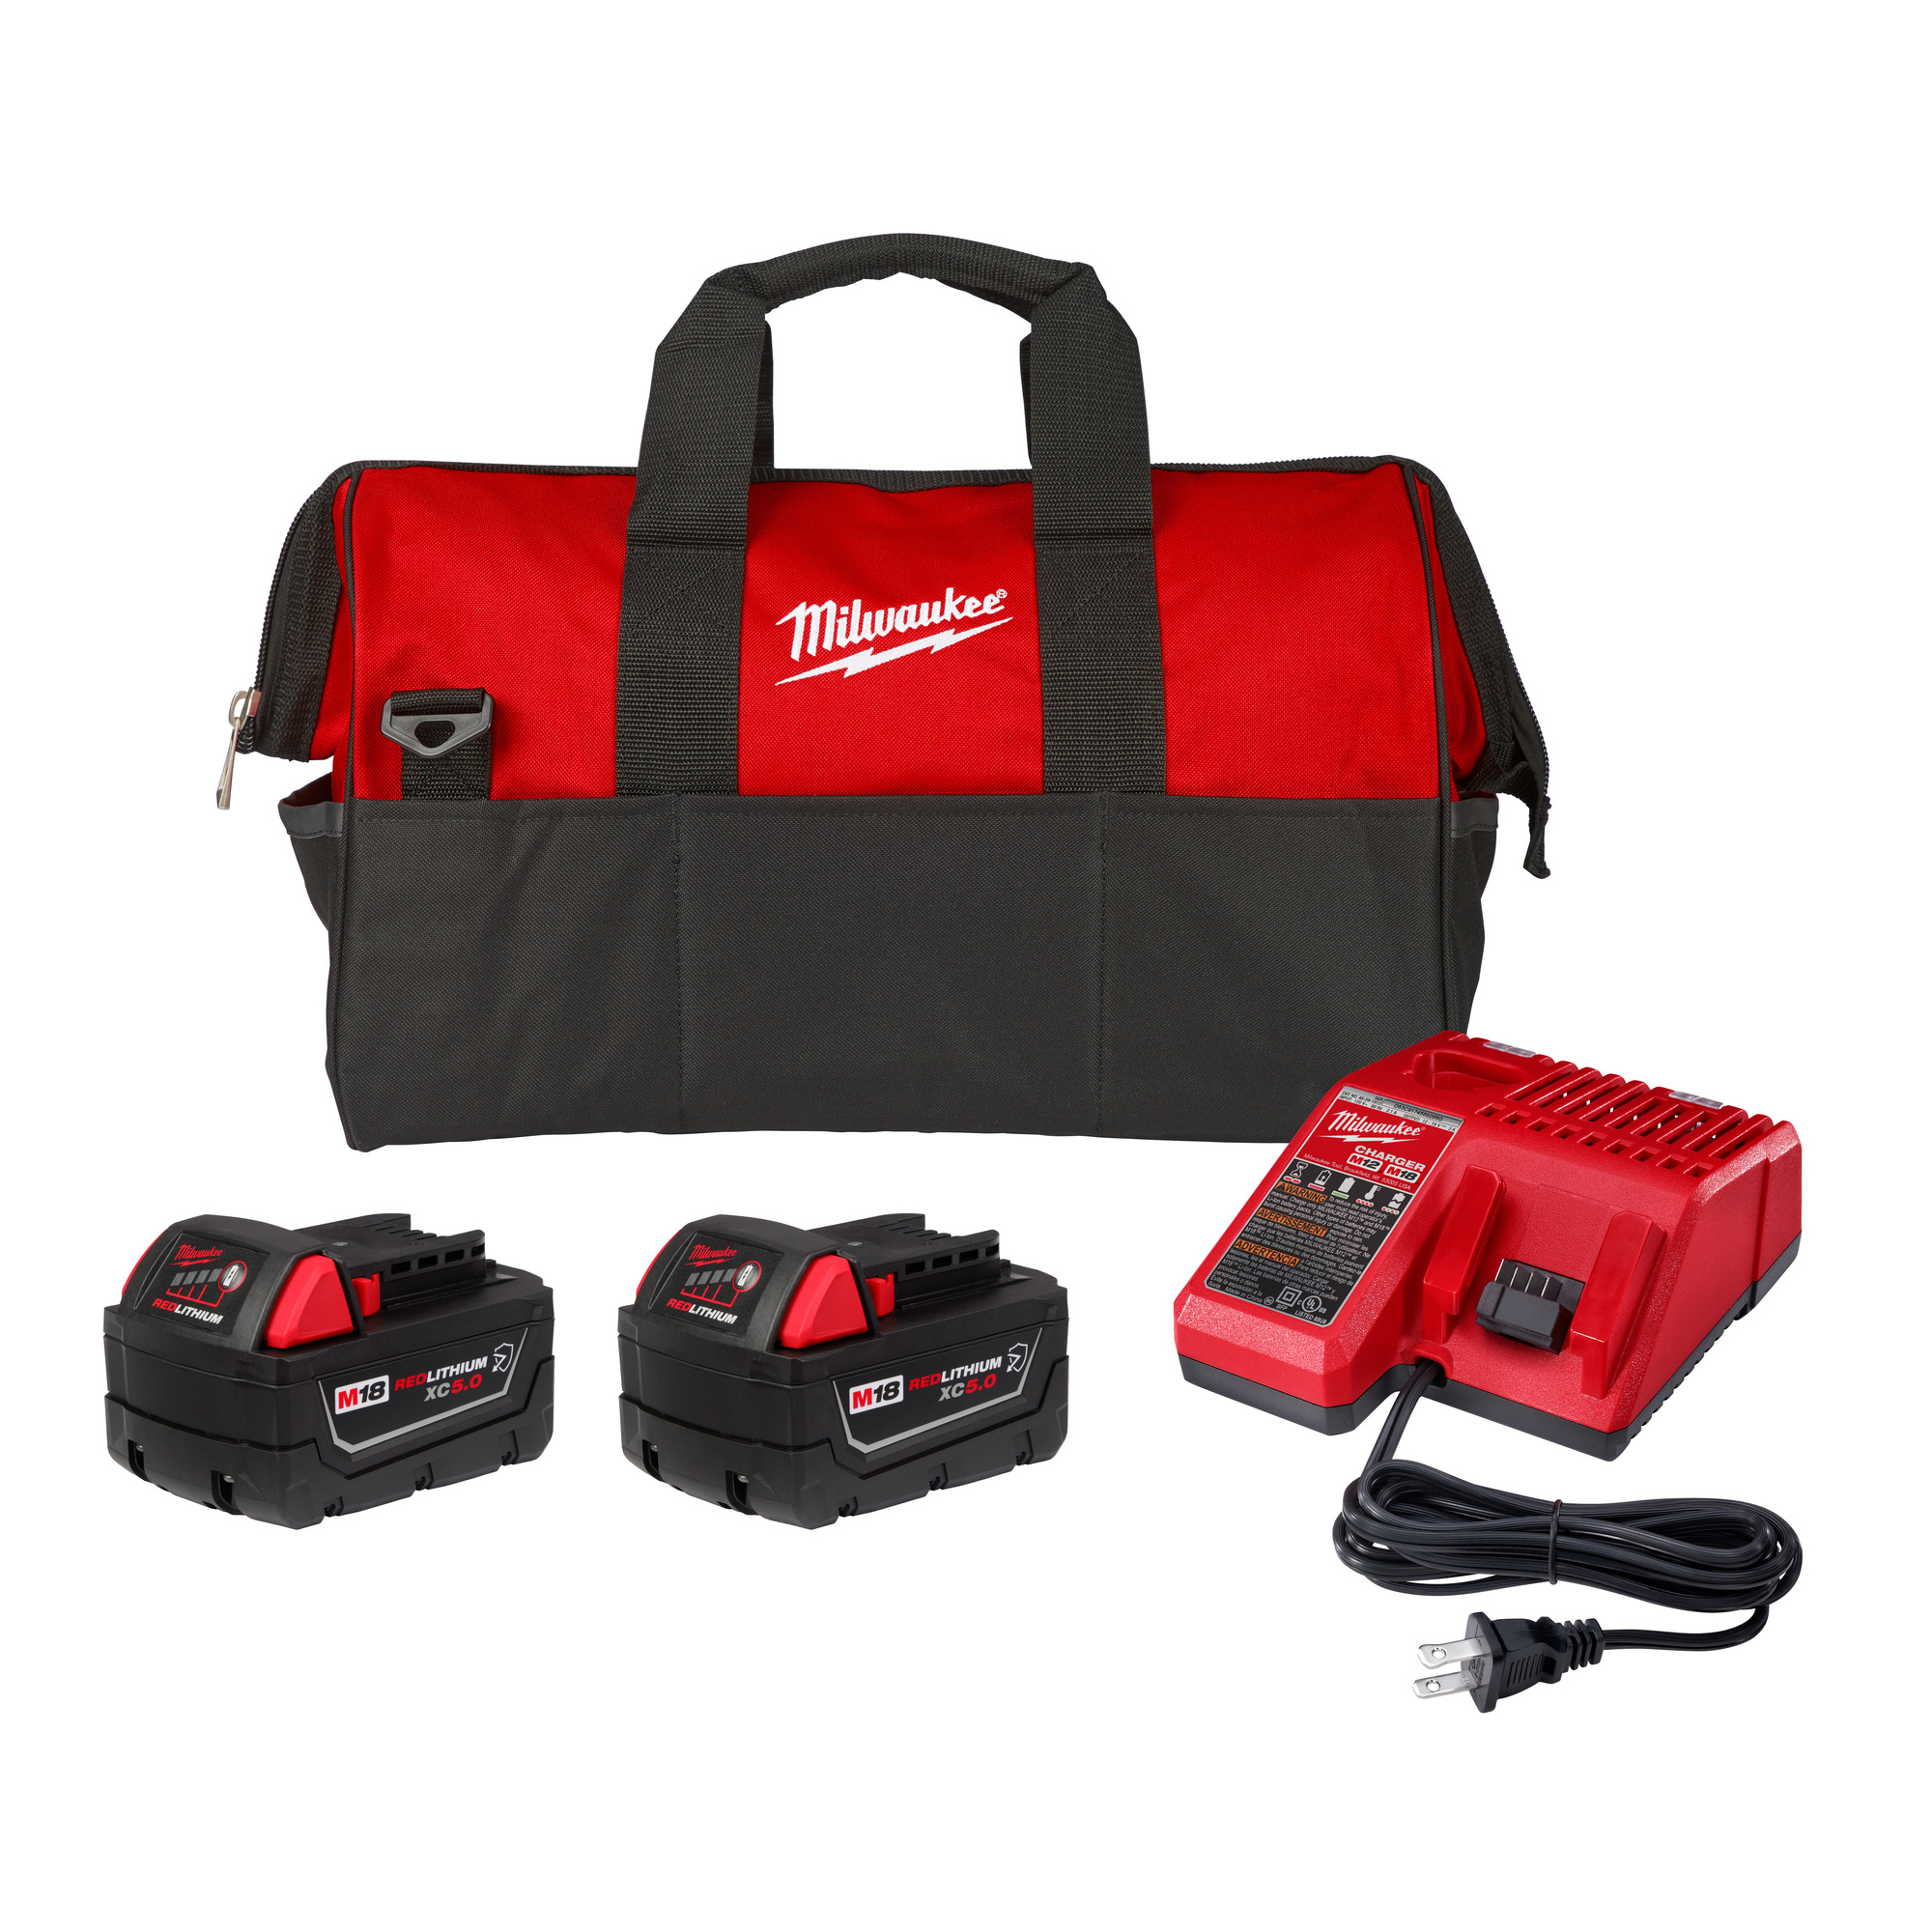 Milwaukee, M18 REDLITHIUM XC5.0 RESISTANT BATTERY STARTER KIT, Volts 18, Battery Type Lithium-ion, Batteries (qty.) 2, Model 48-59-1852R